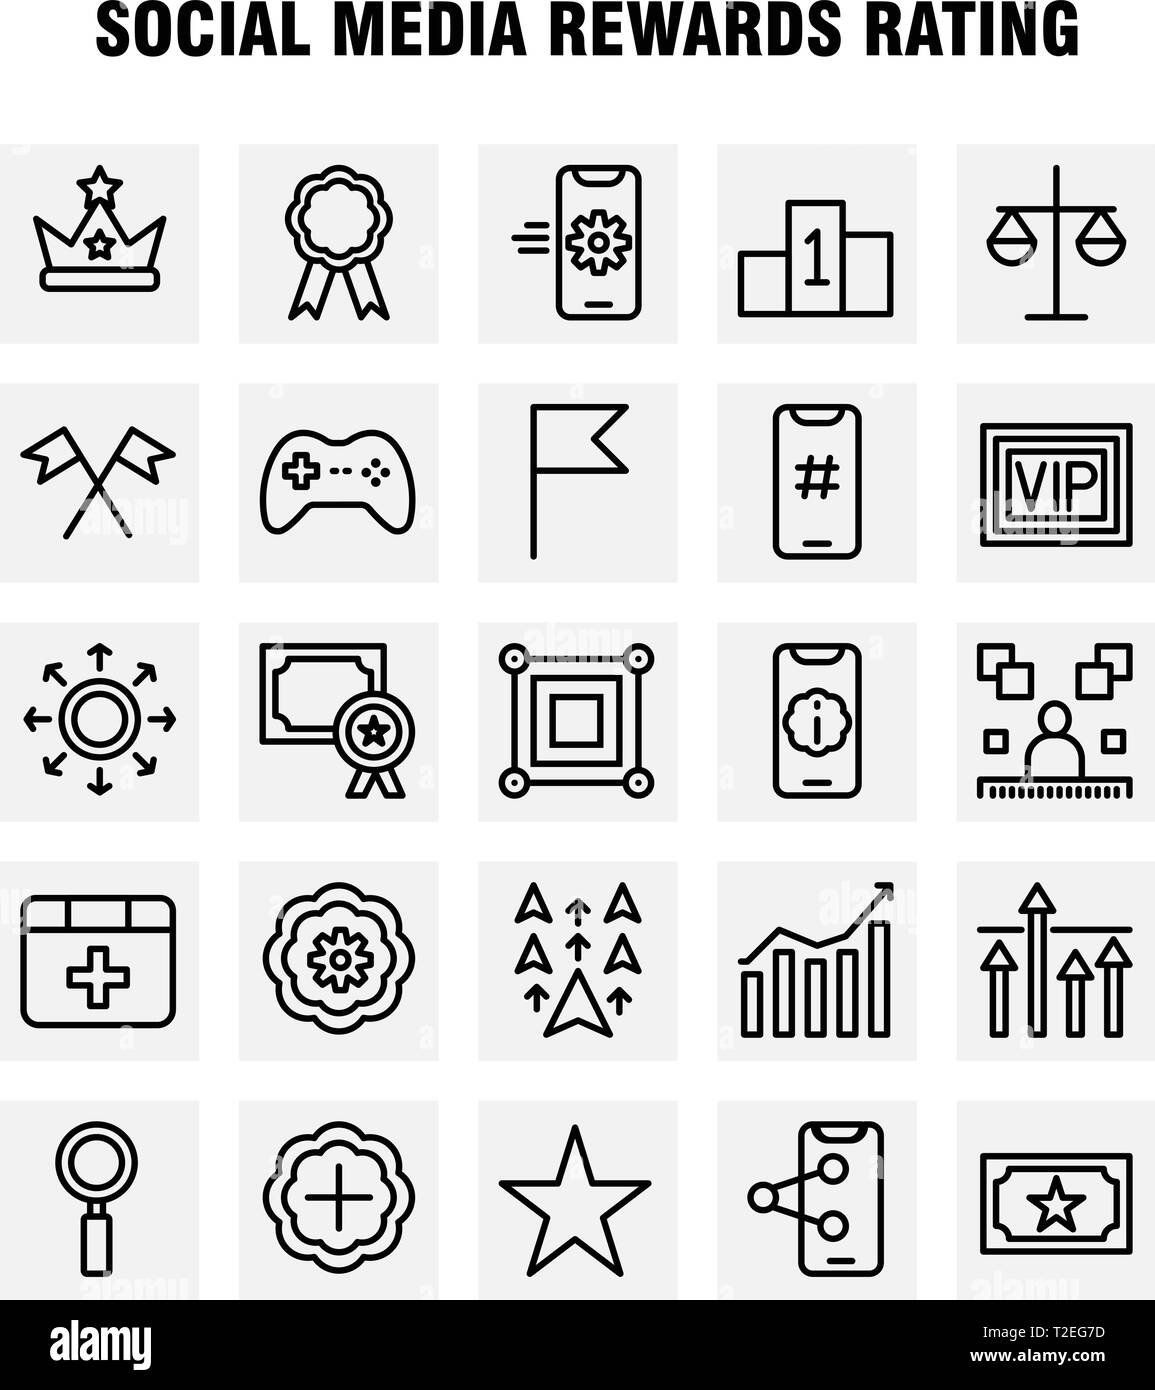 Social Media Rewards Rating Line Icon Pack For Designers And Developers. Icons Of Cinema, Movie, Ticket, Rating, Gear, Settings, Social Media, Vector Stock Vector